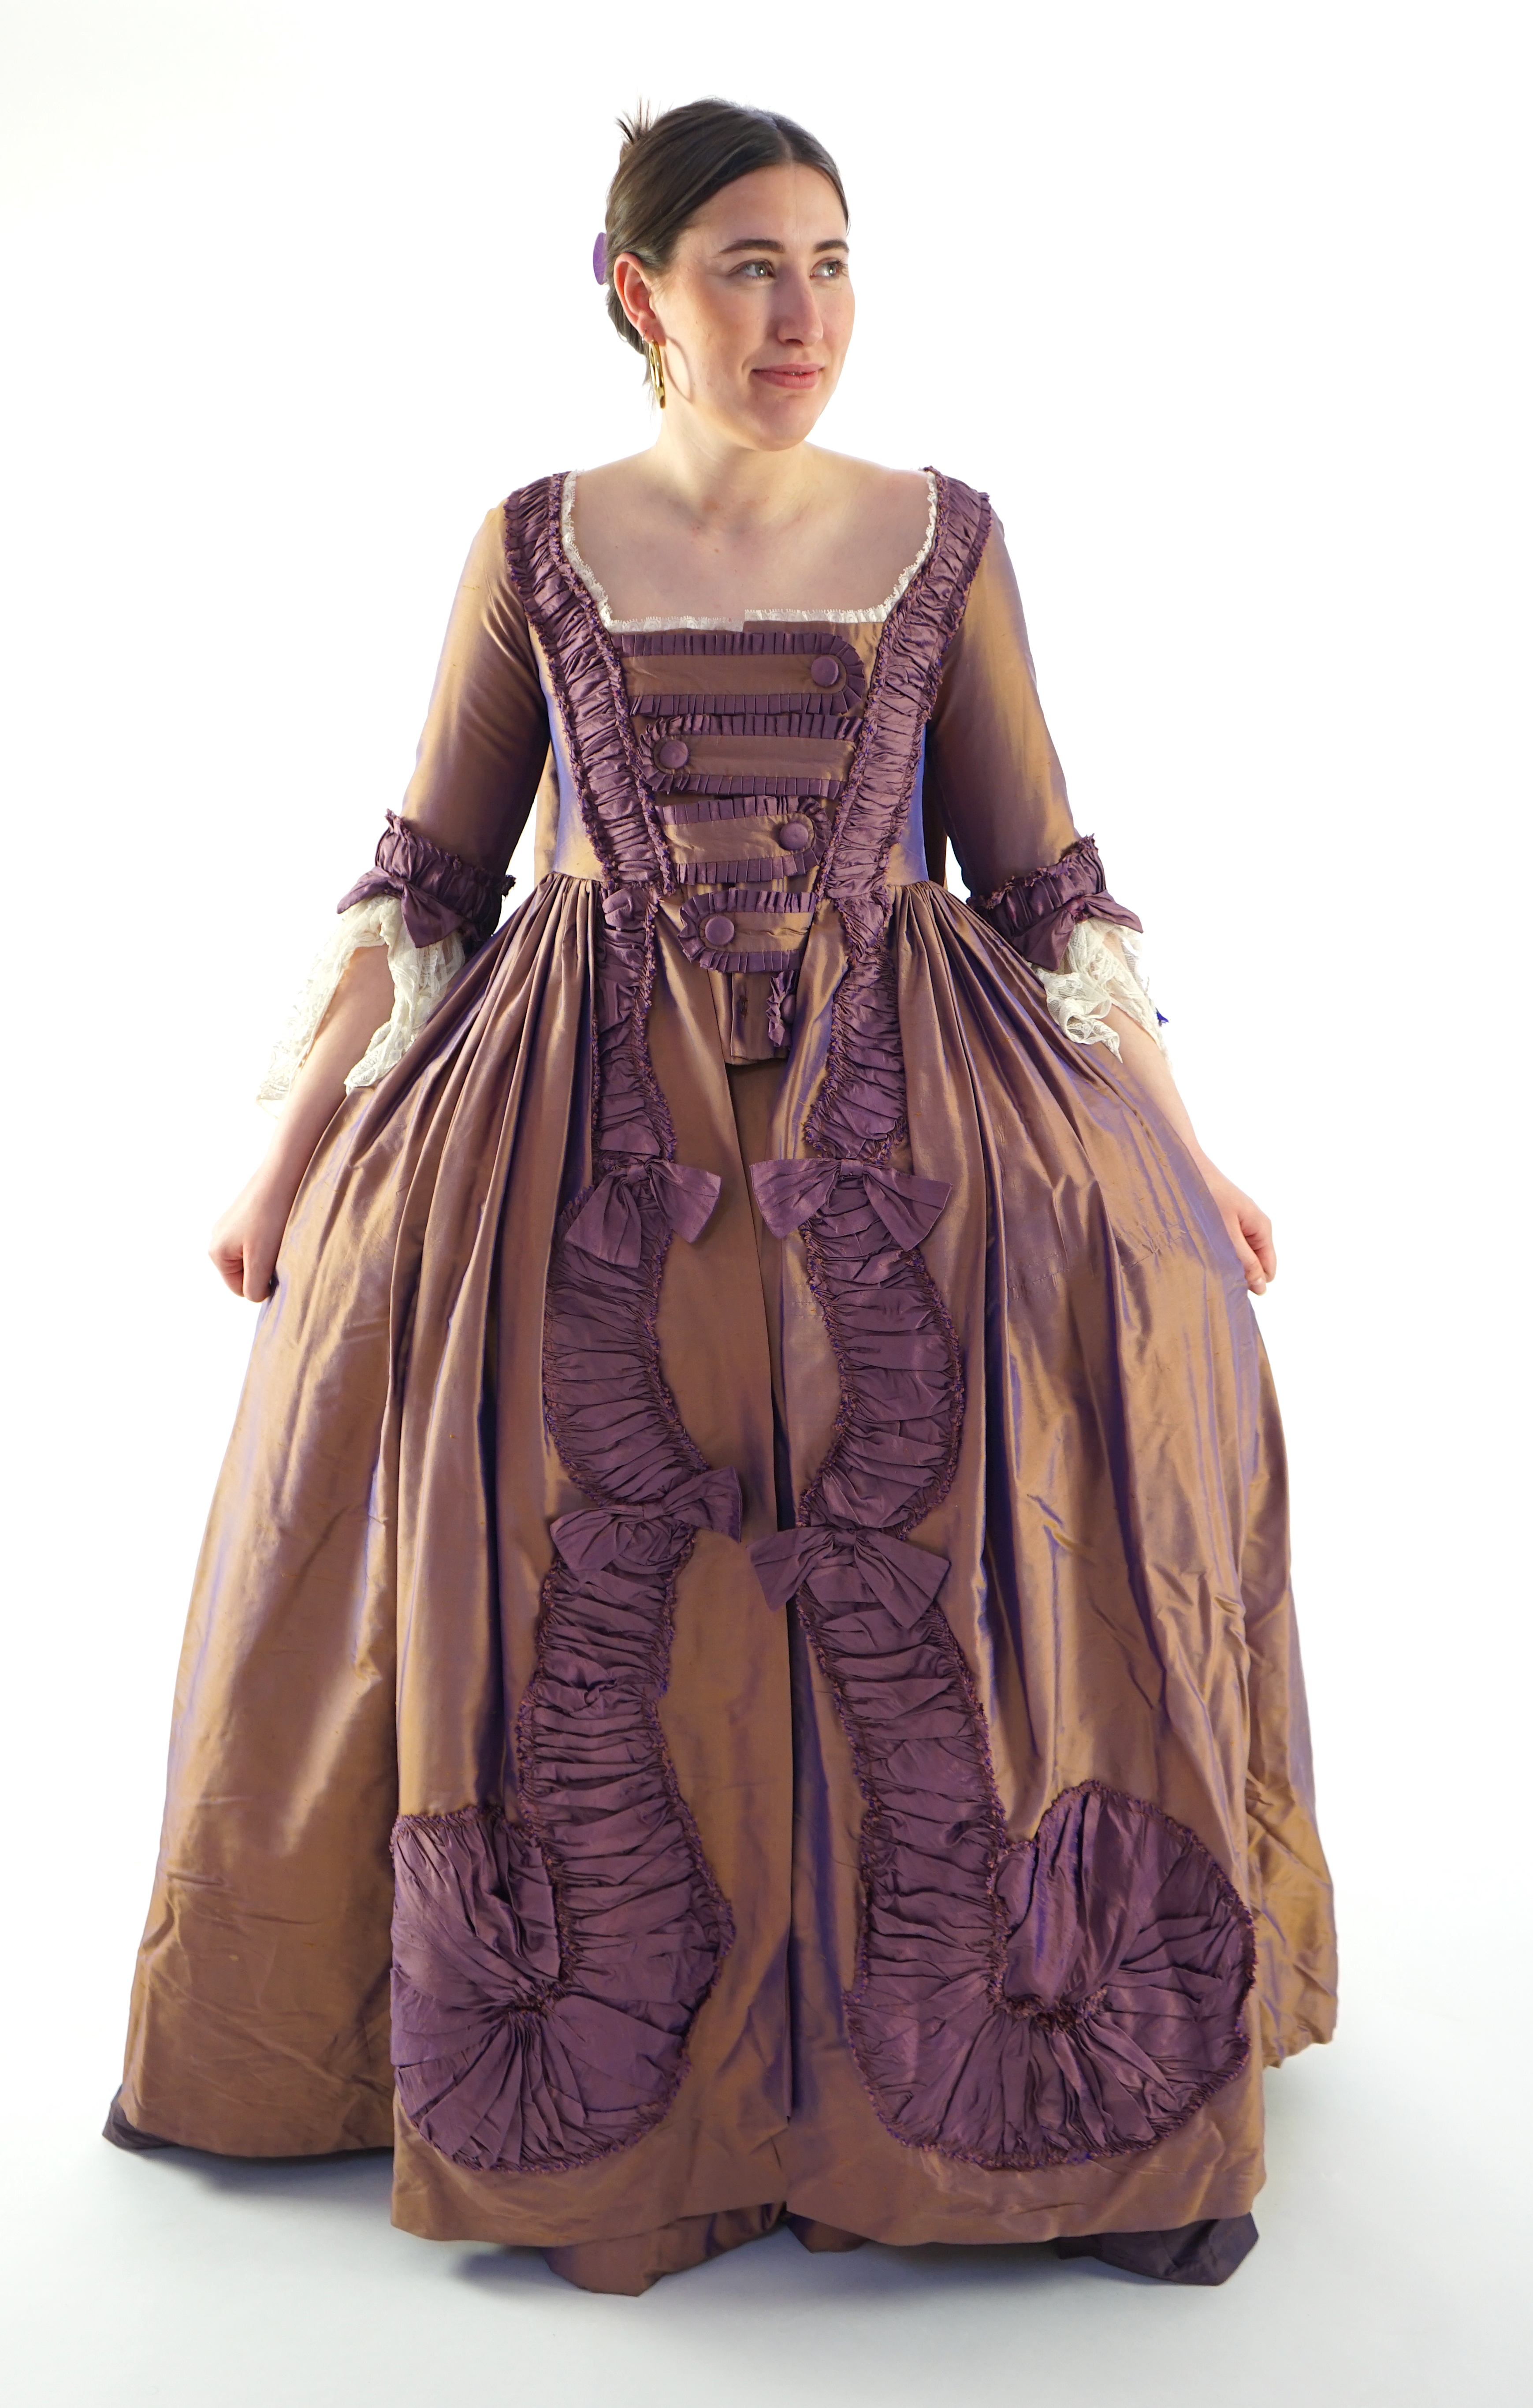 An exceptional lady's 18th century style sack dress, bronze and purple with fine lace cuffs - with skirt and pannier frame. Ex London Festival Opera 'The Magic Flute'.